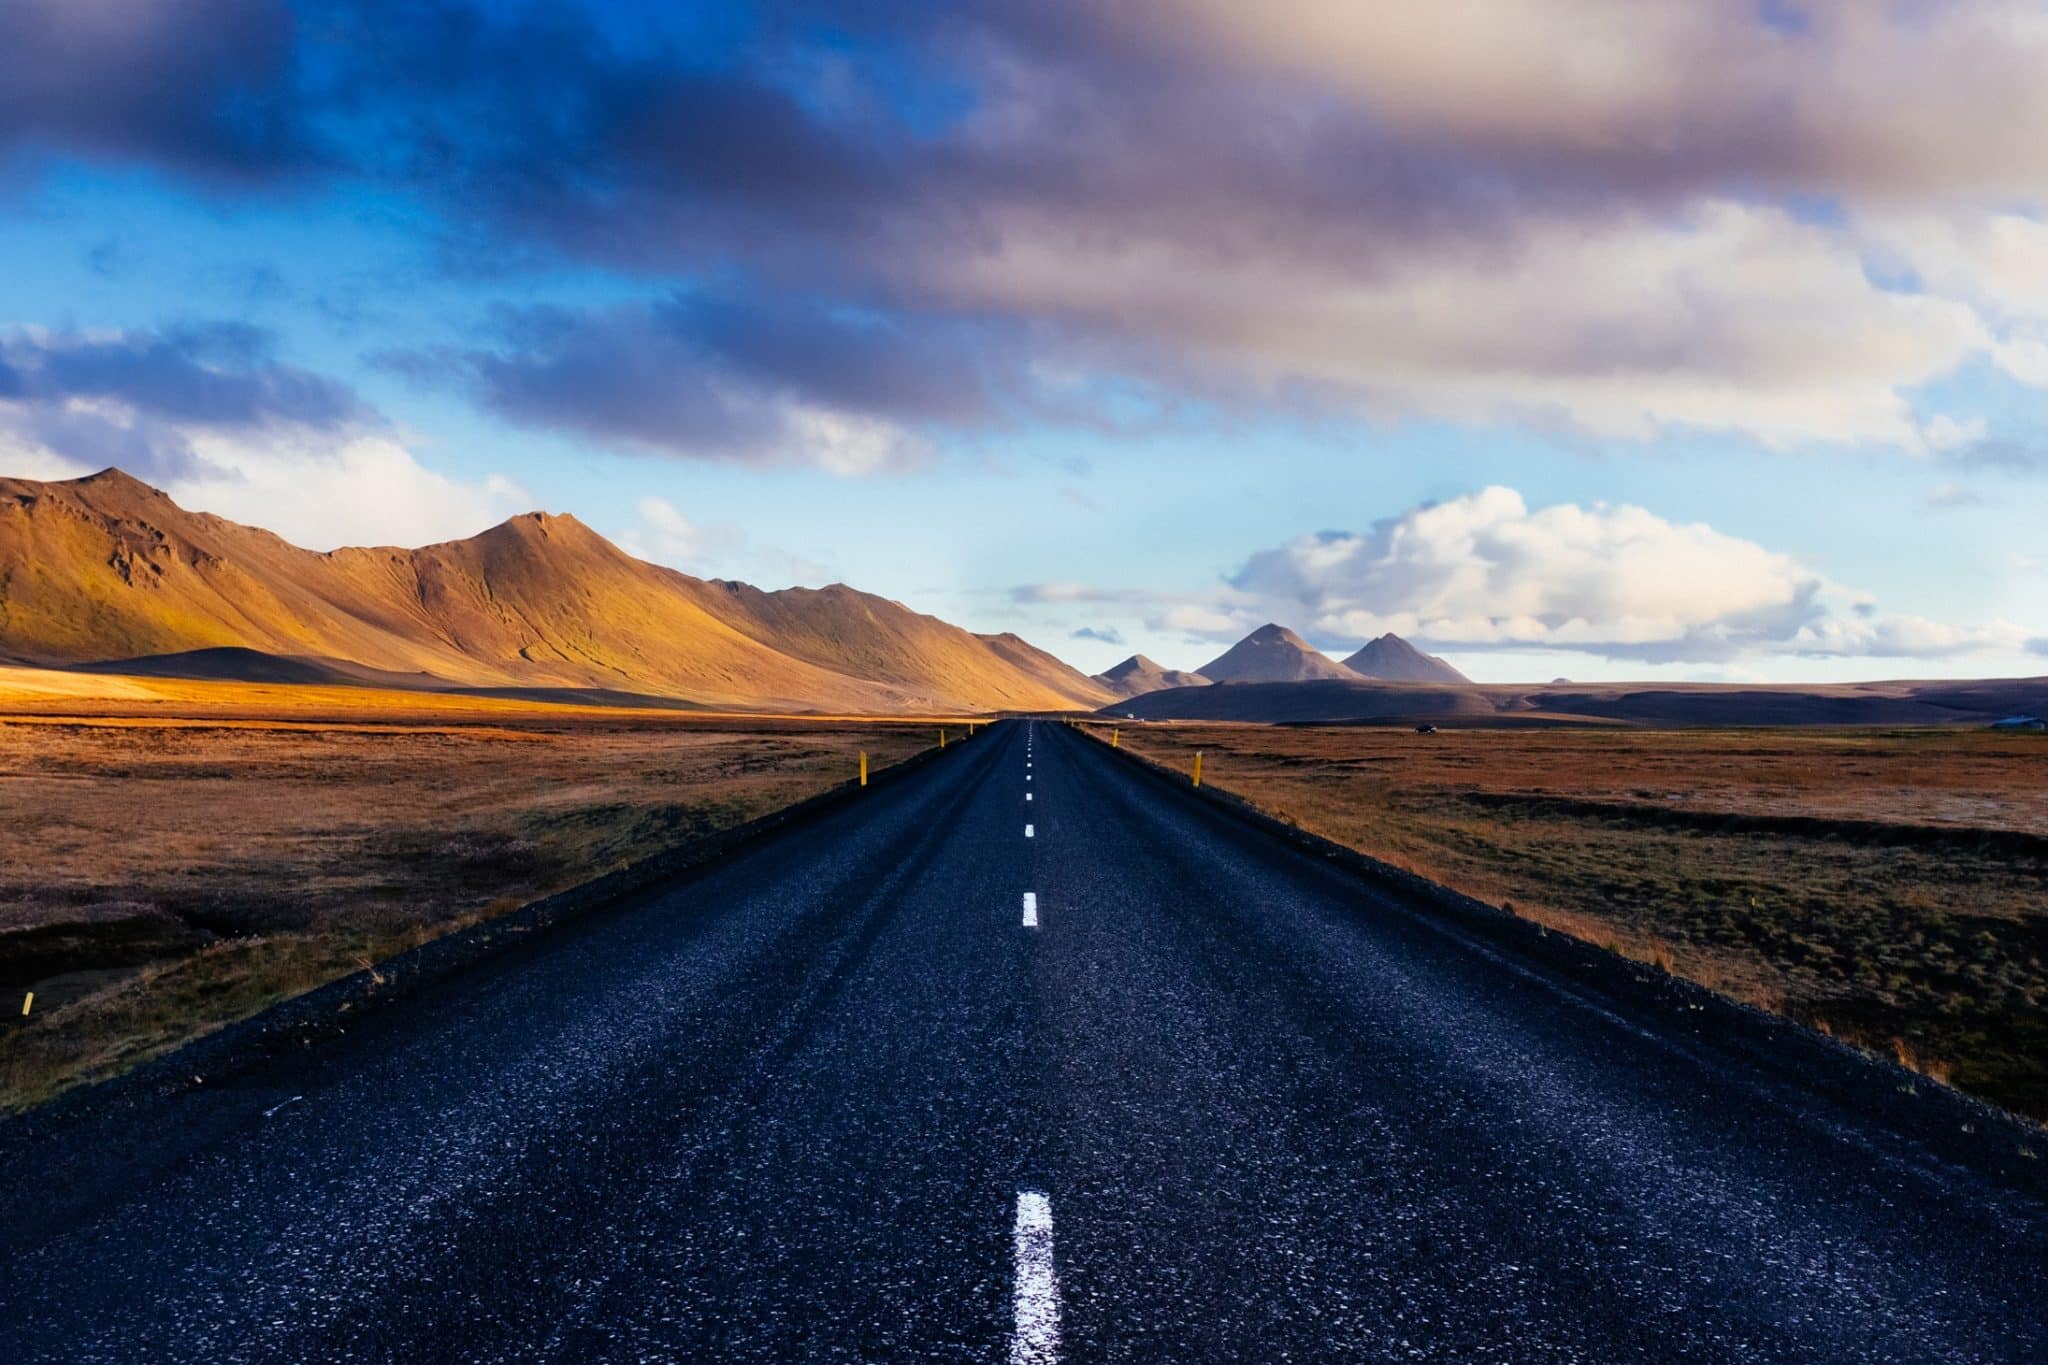 An open road with mountains in the background